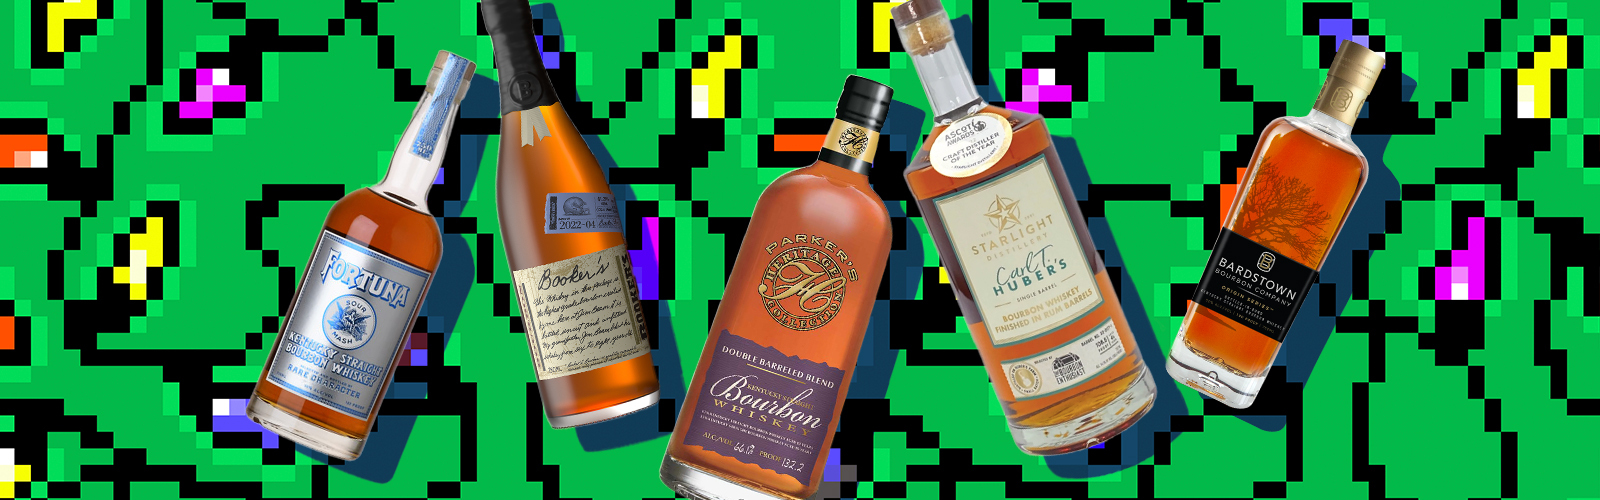 End of Year Bourbons Blind Tasted